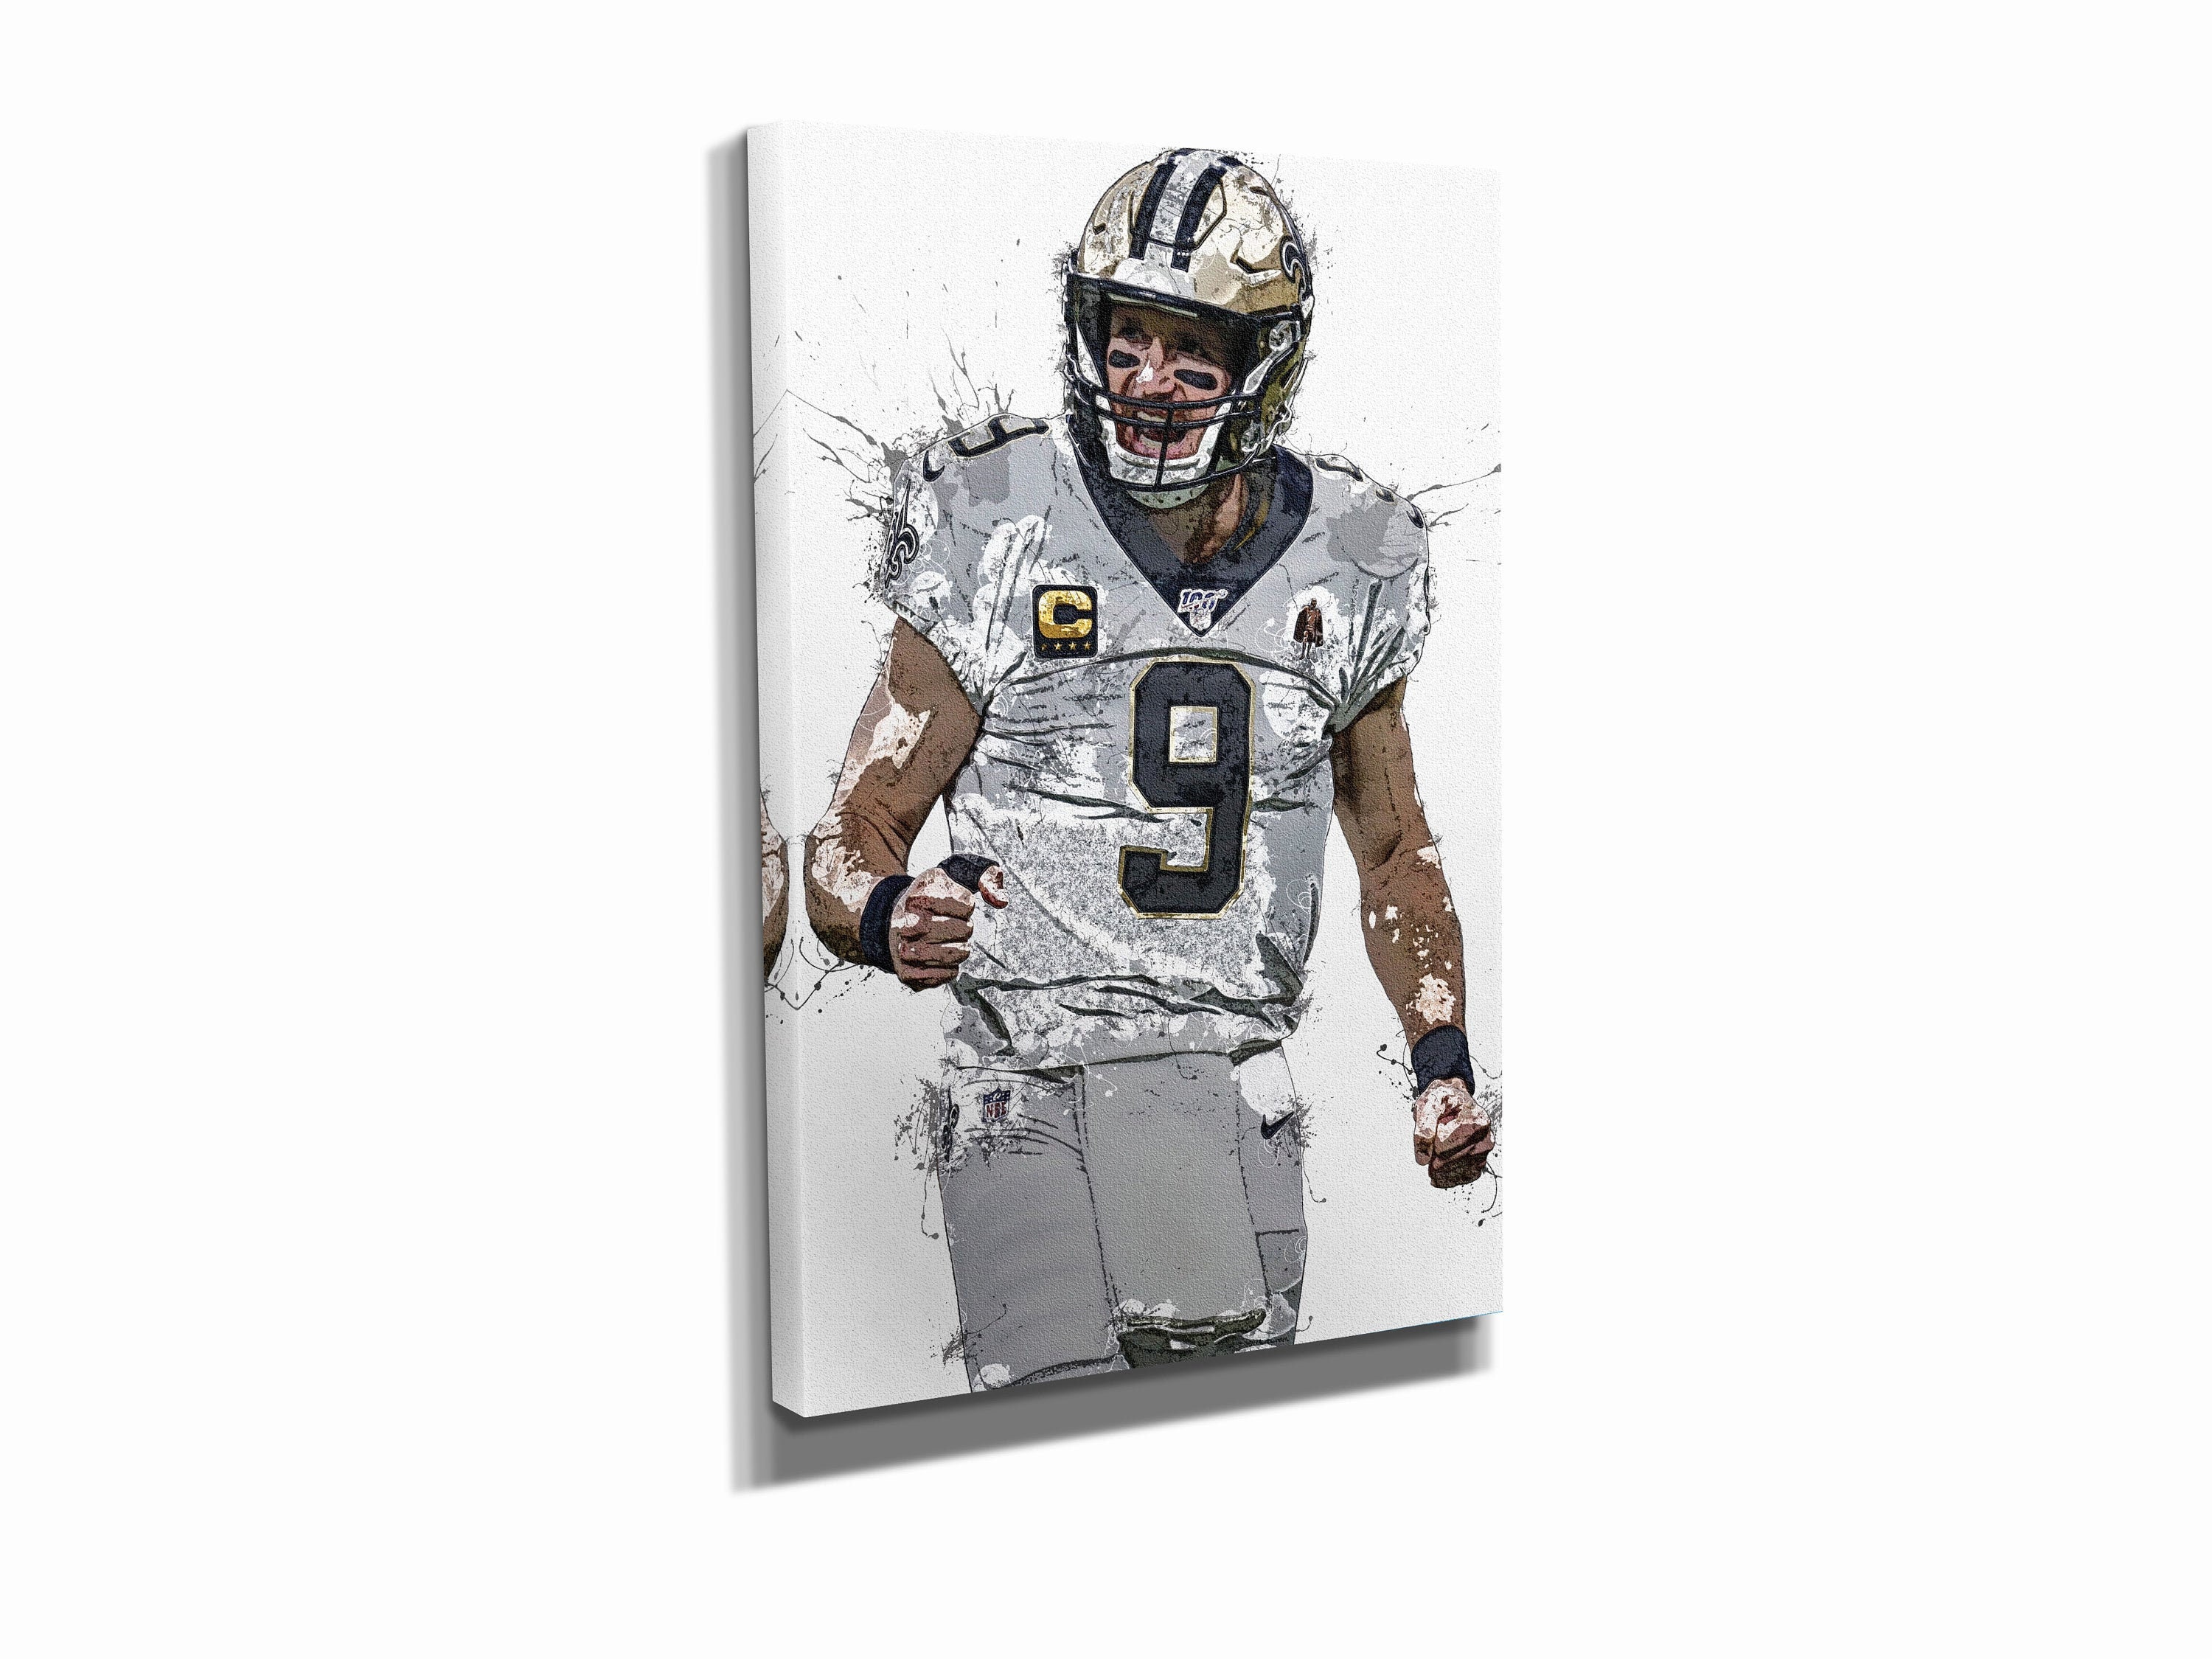 Drew Brees Poster New Orleans Saints Football Hand Made | Etsy